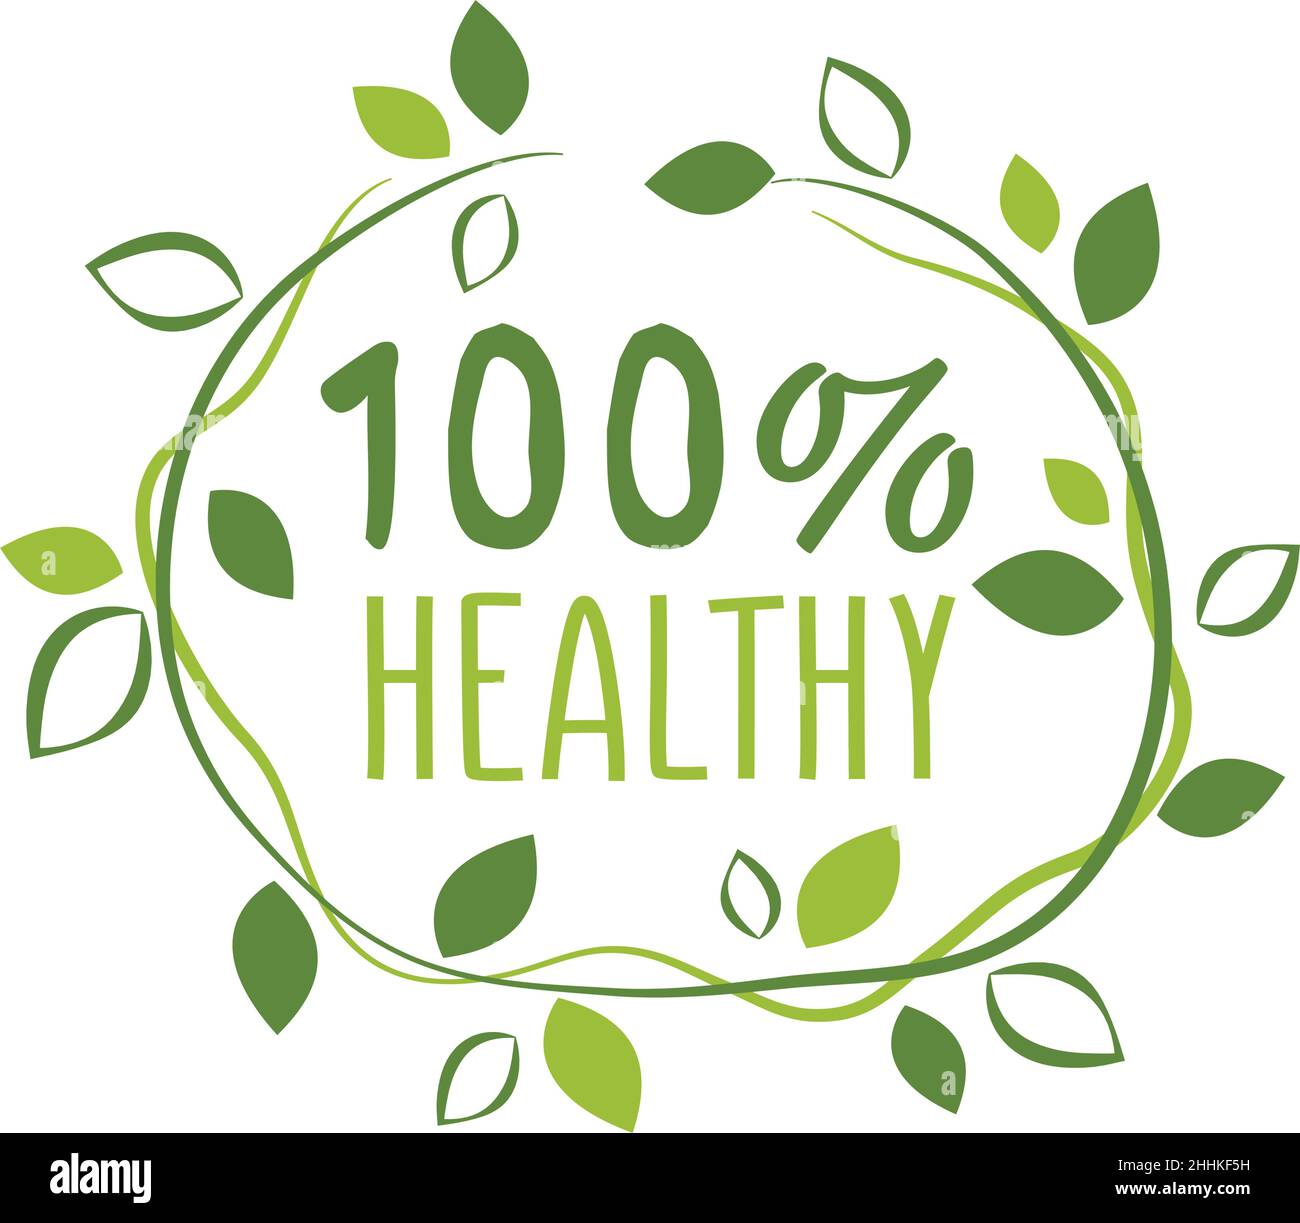 Healthy 100% sticker, vector illustration for graphic and web design Stock Vector